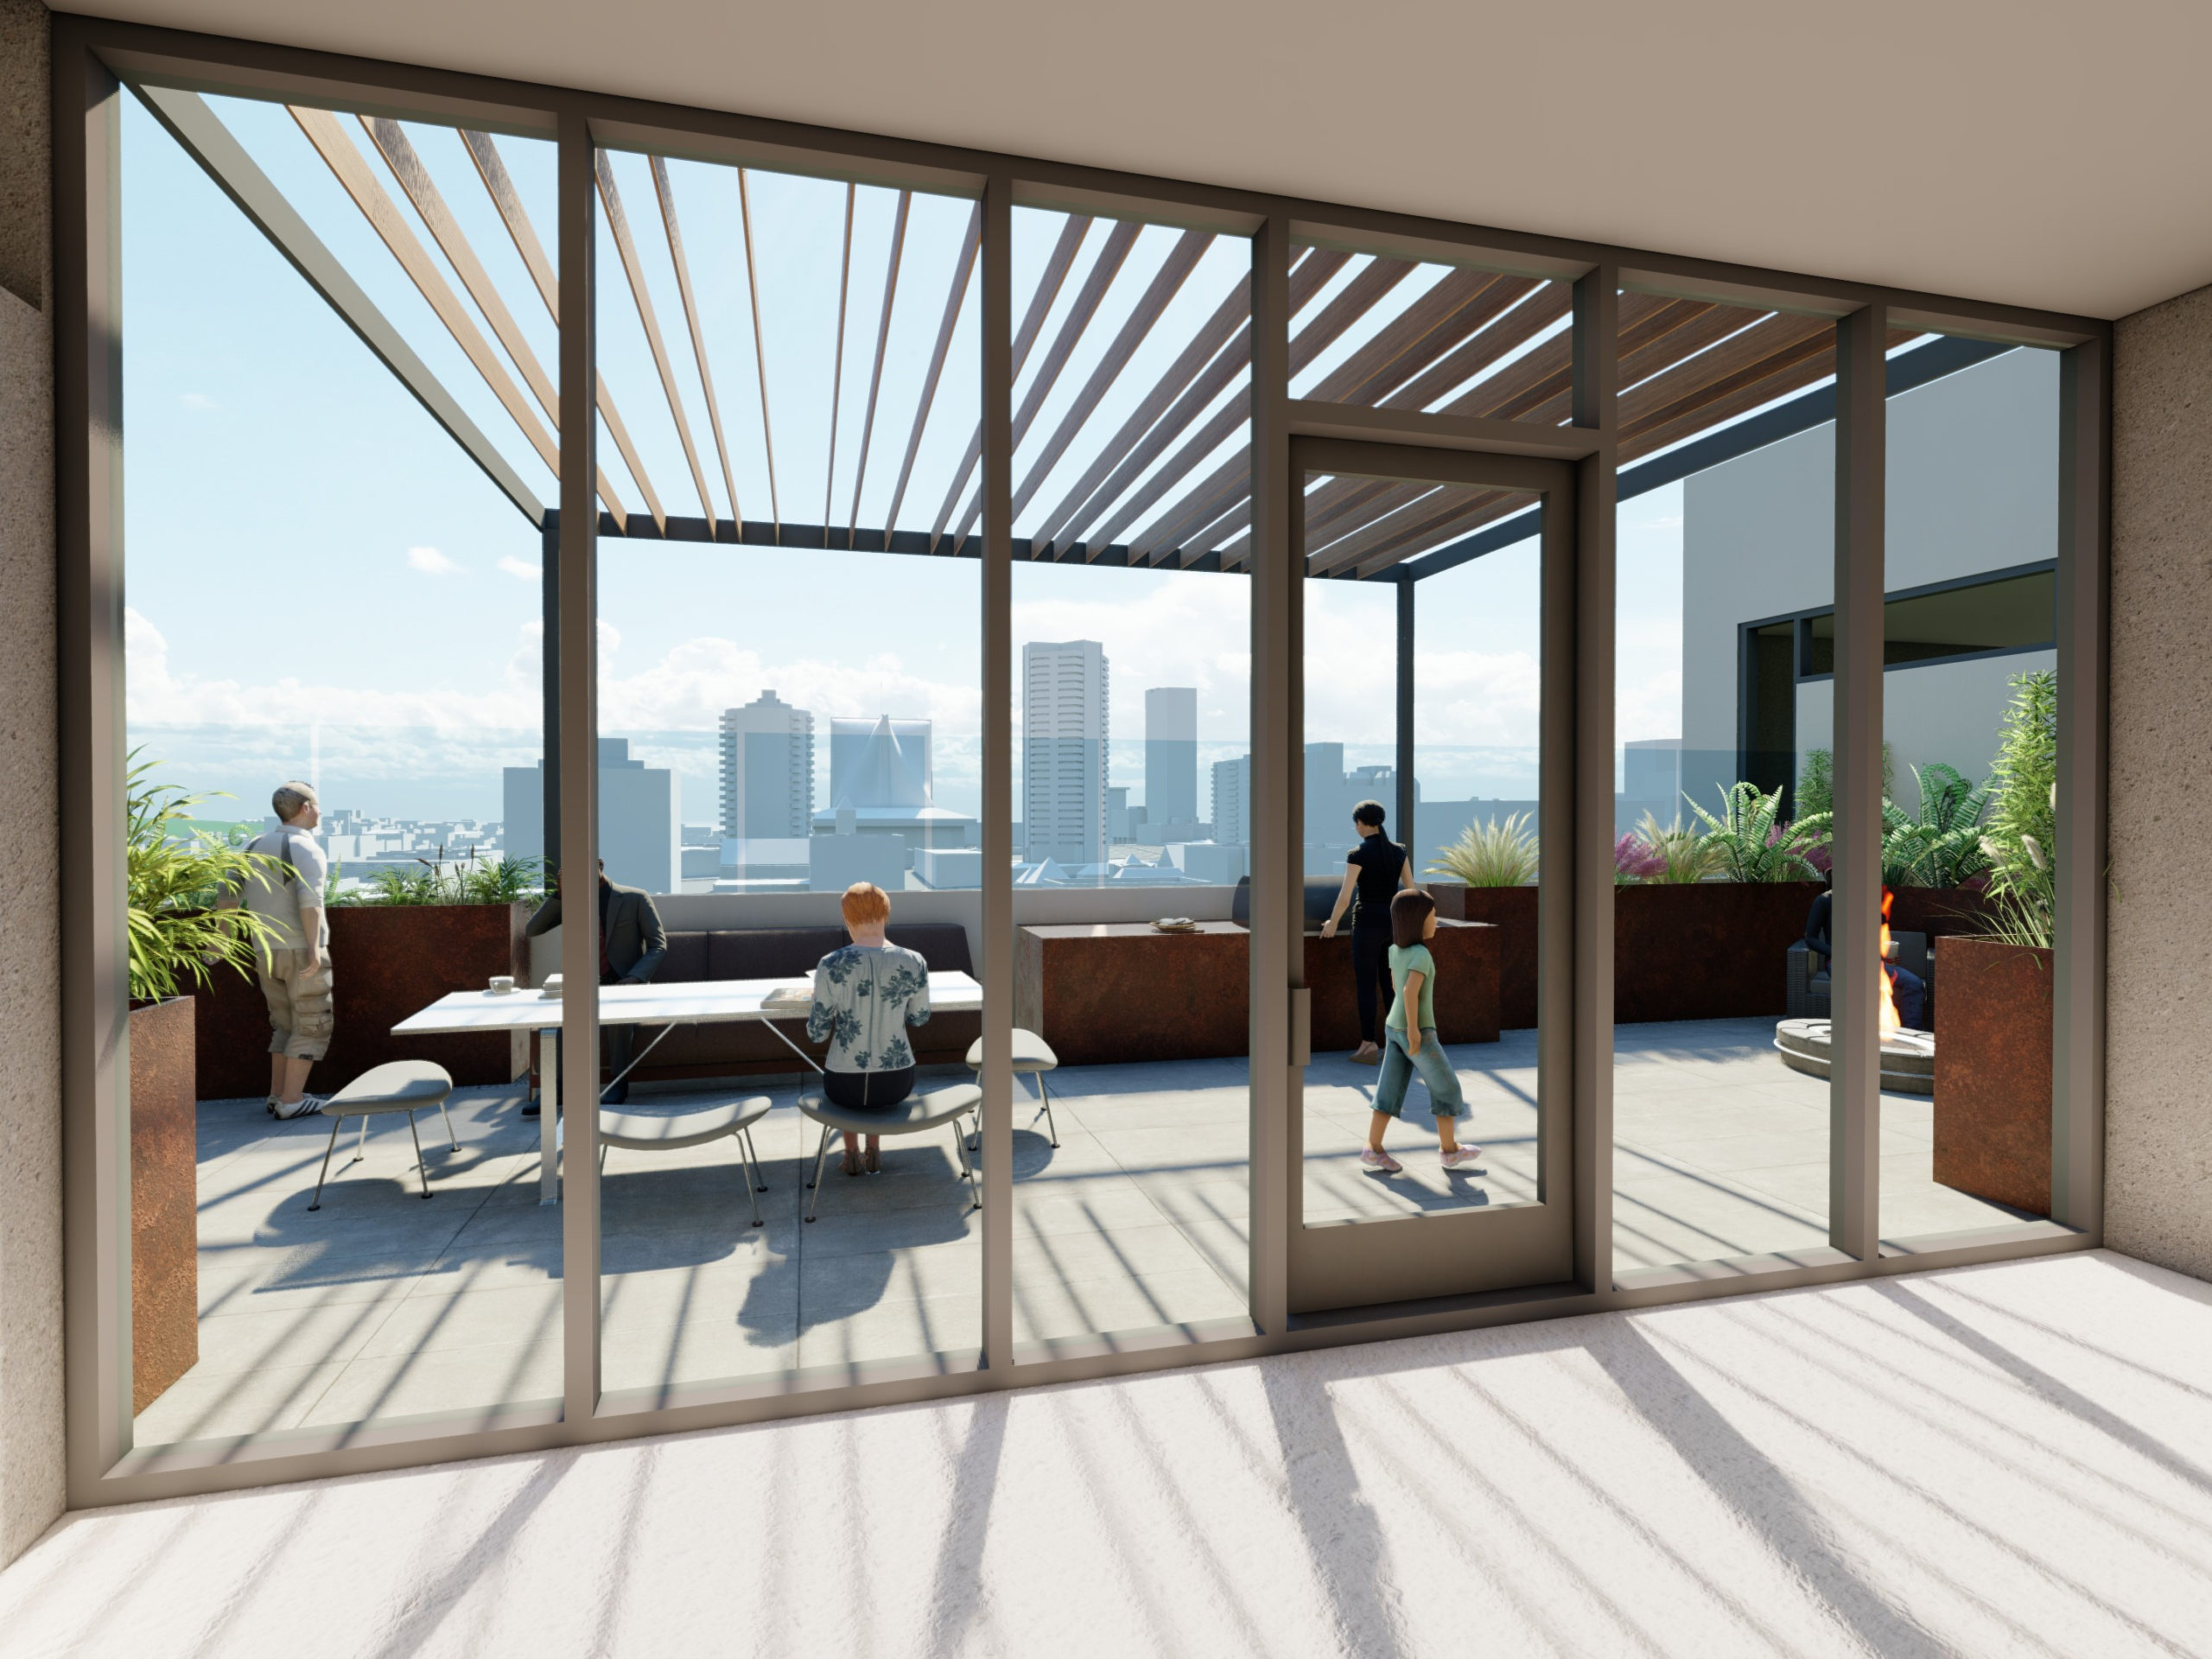 921 O'Farrell Street roof deck amenity space with views over Cathedral Hill, rendering courtesy David Baker Architects